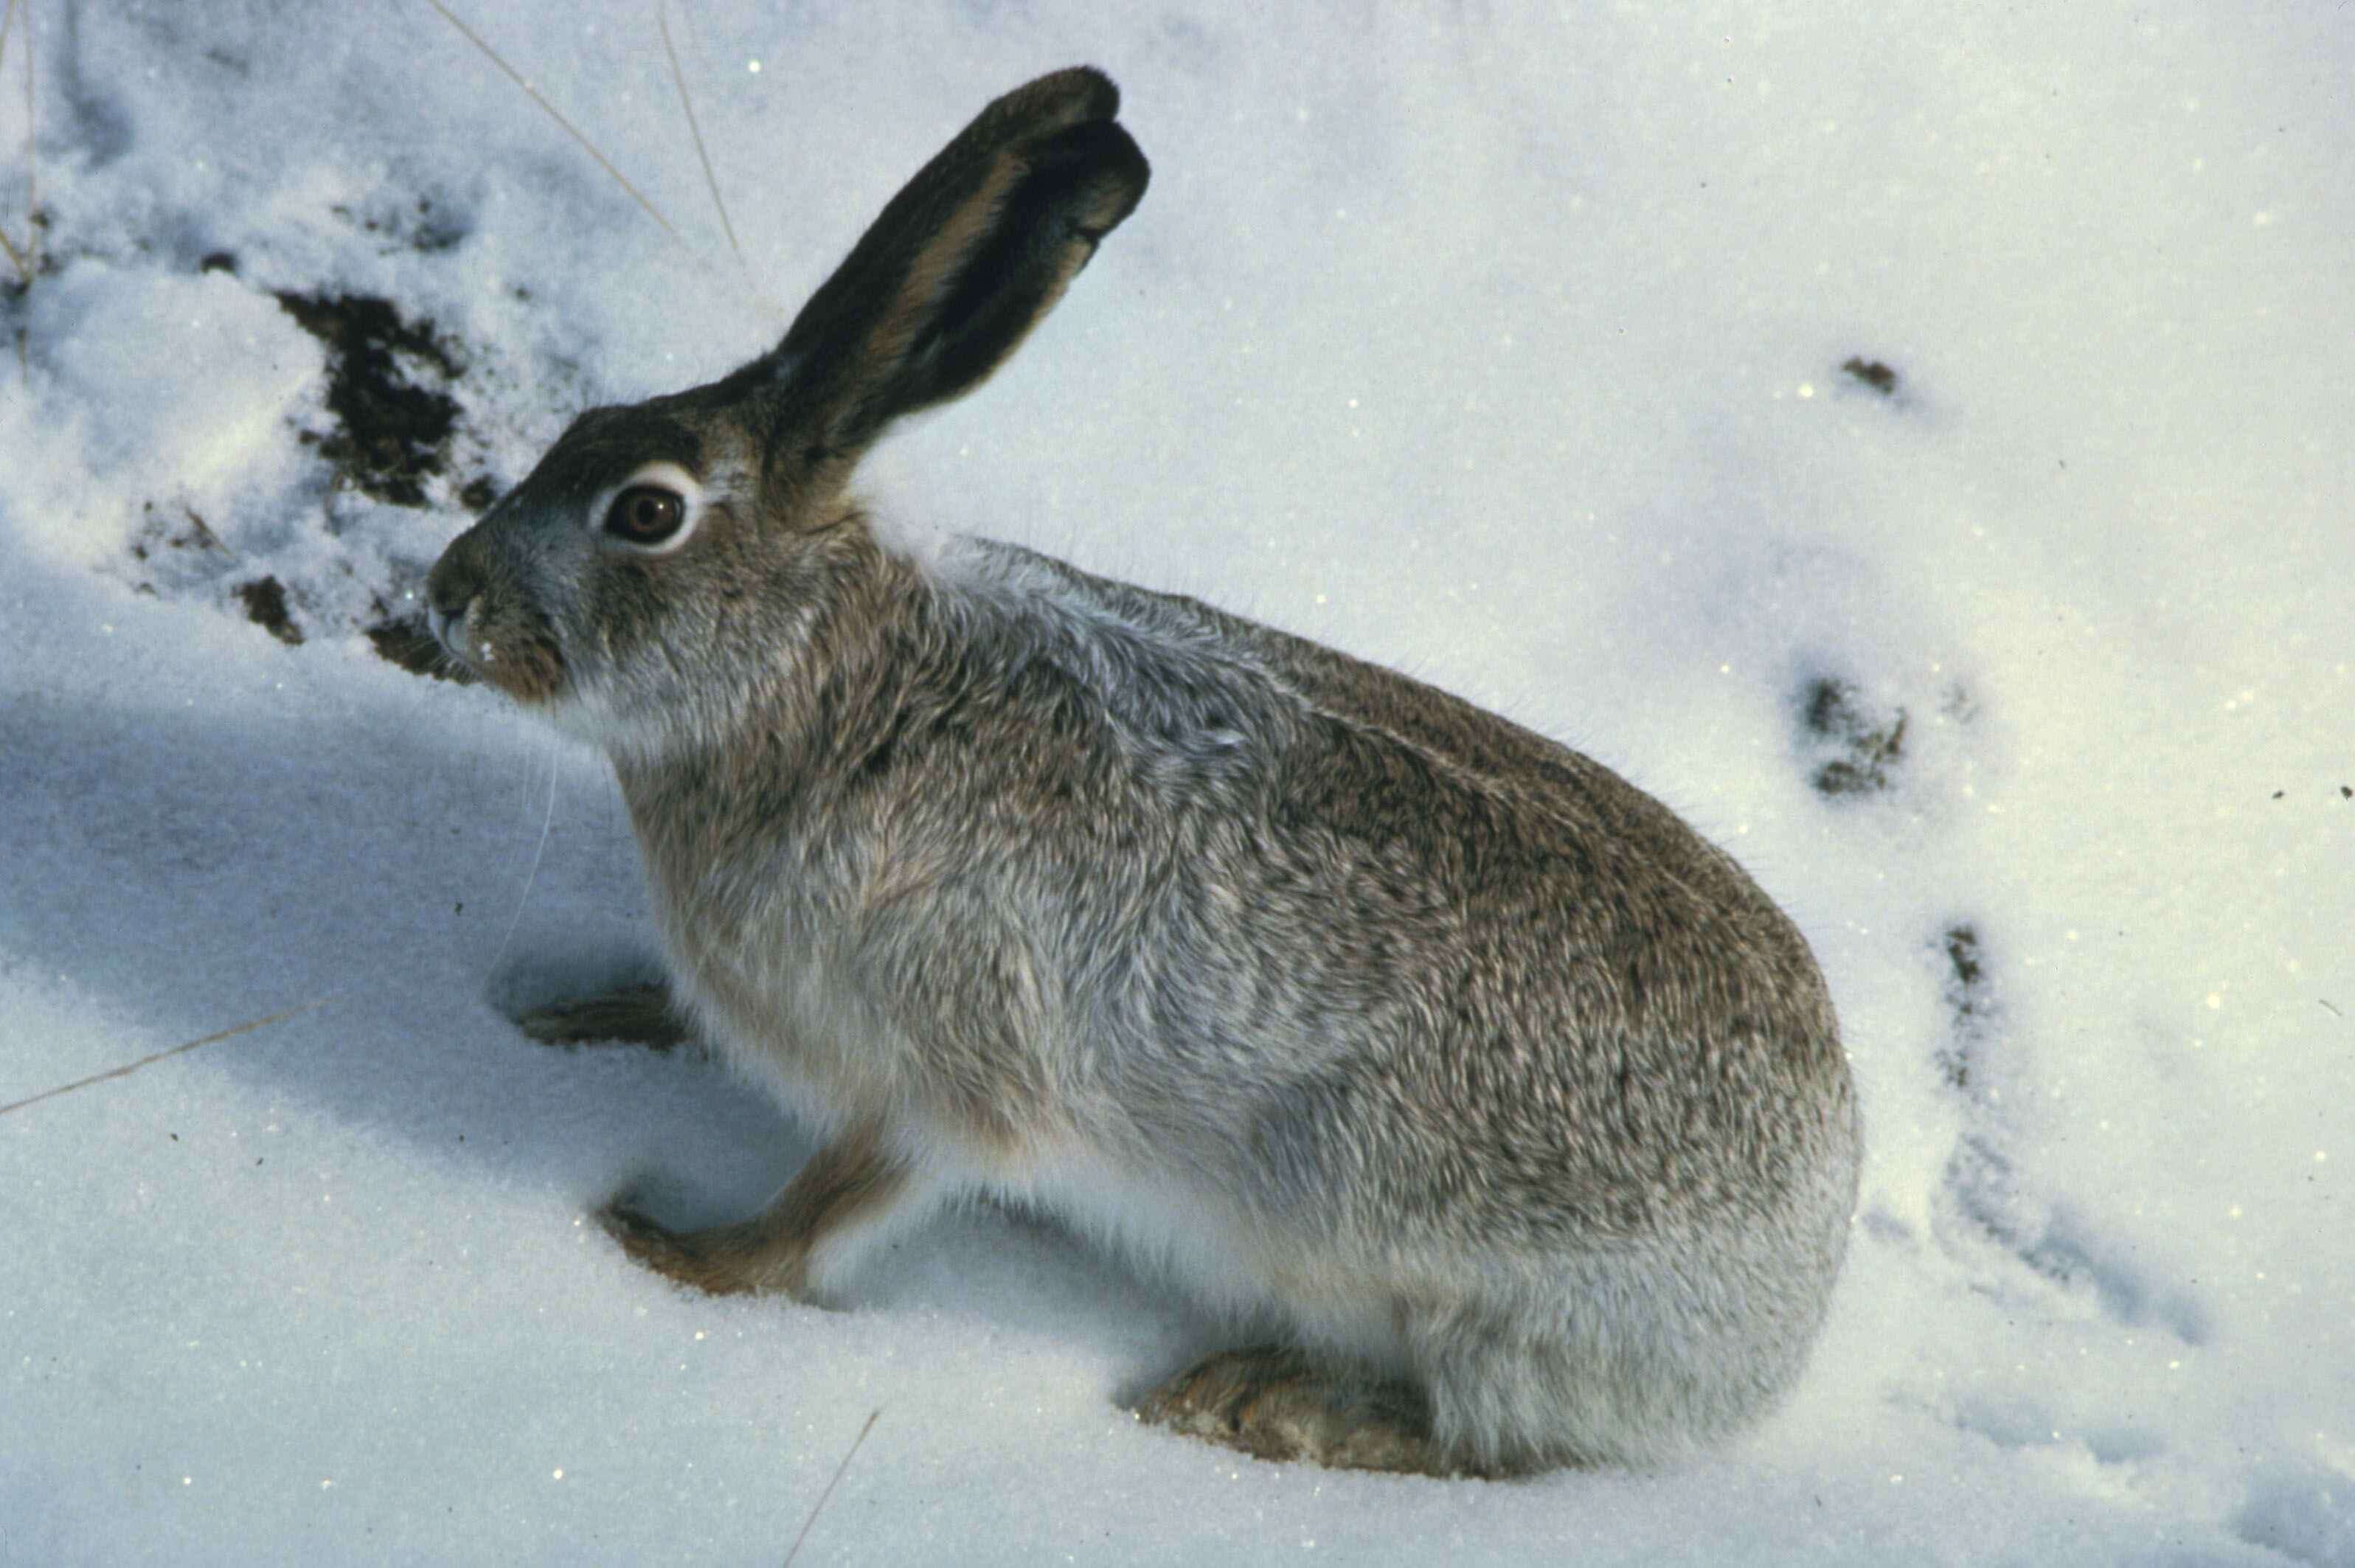 Image of rabbits and hares